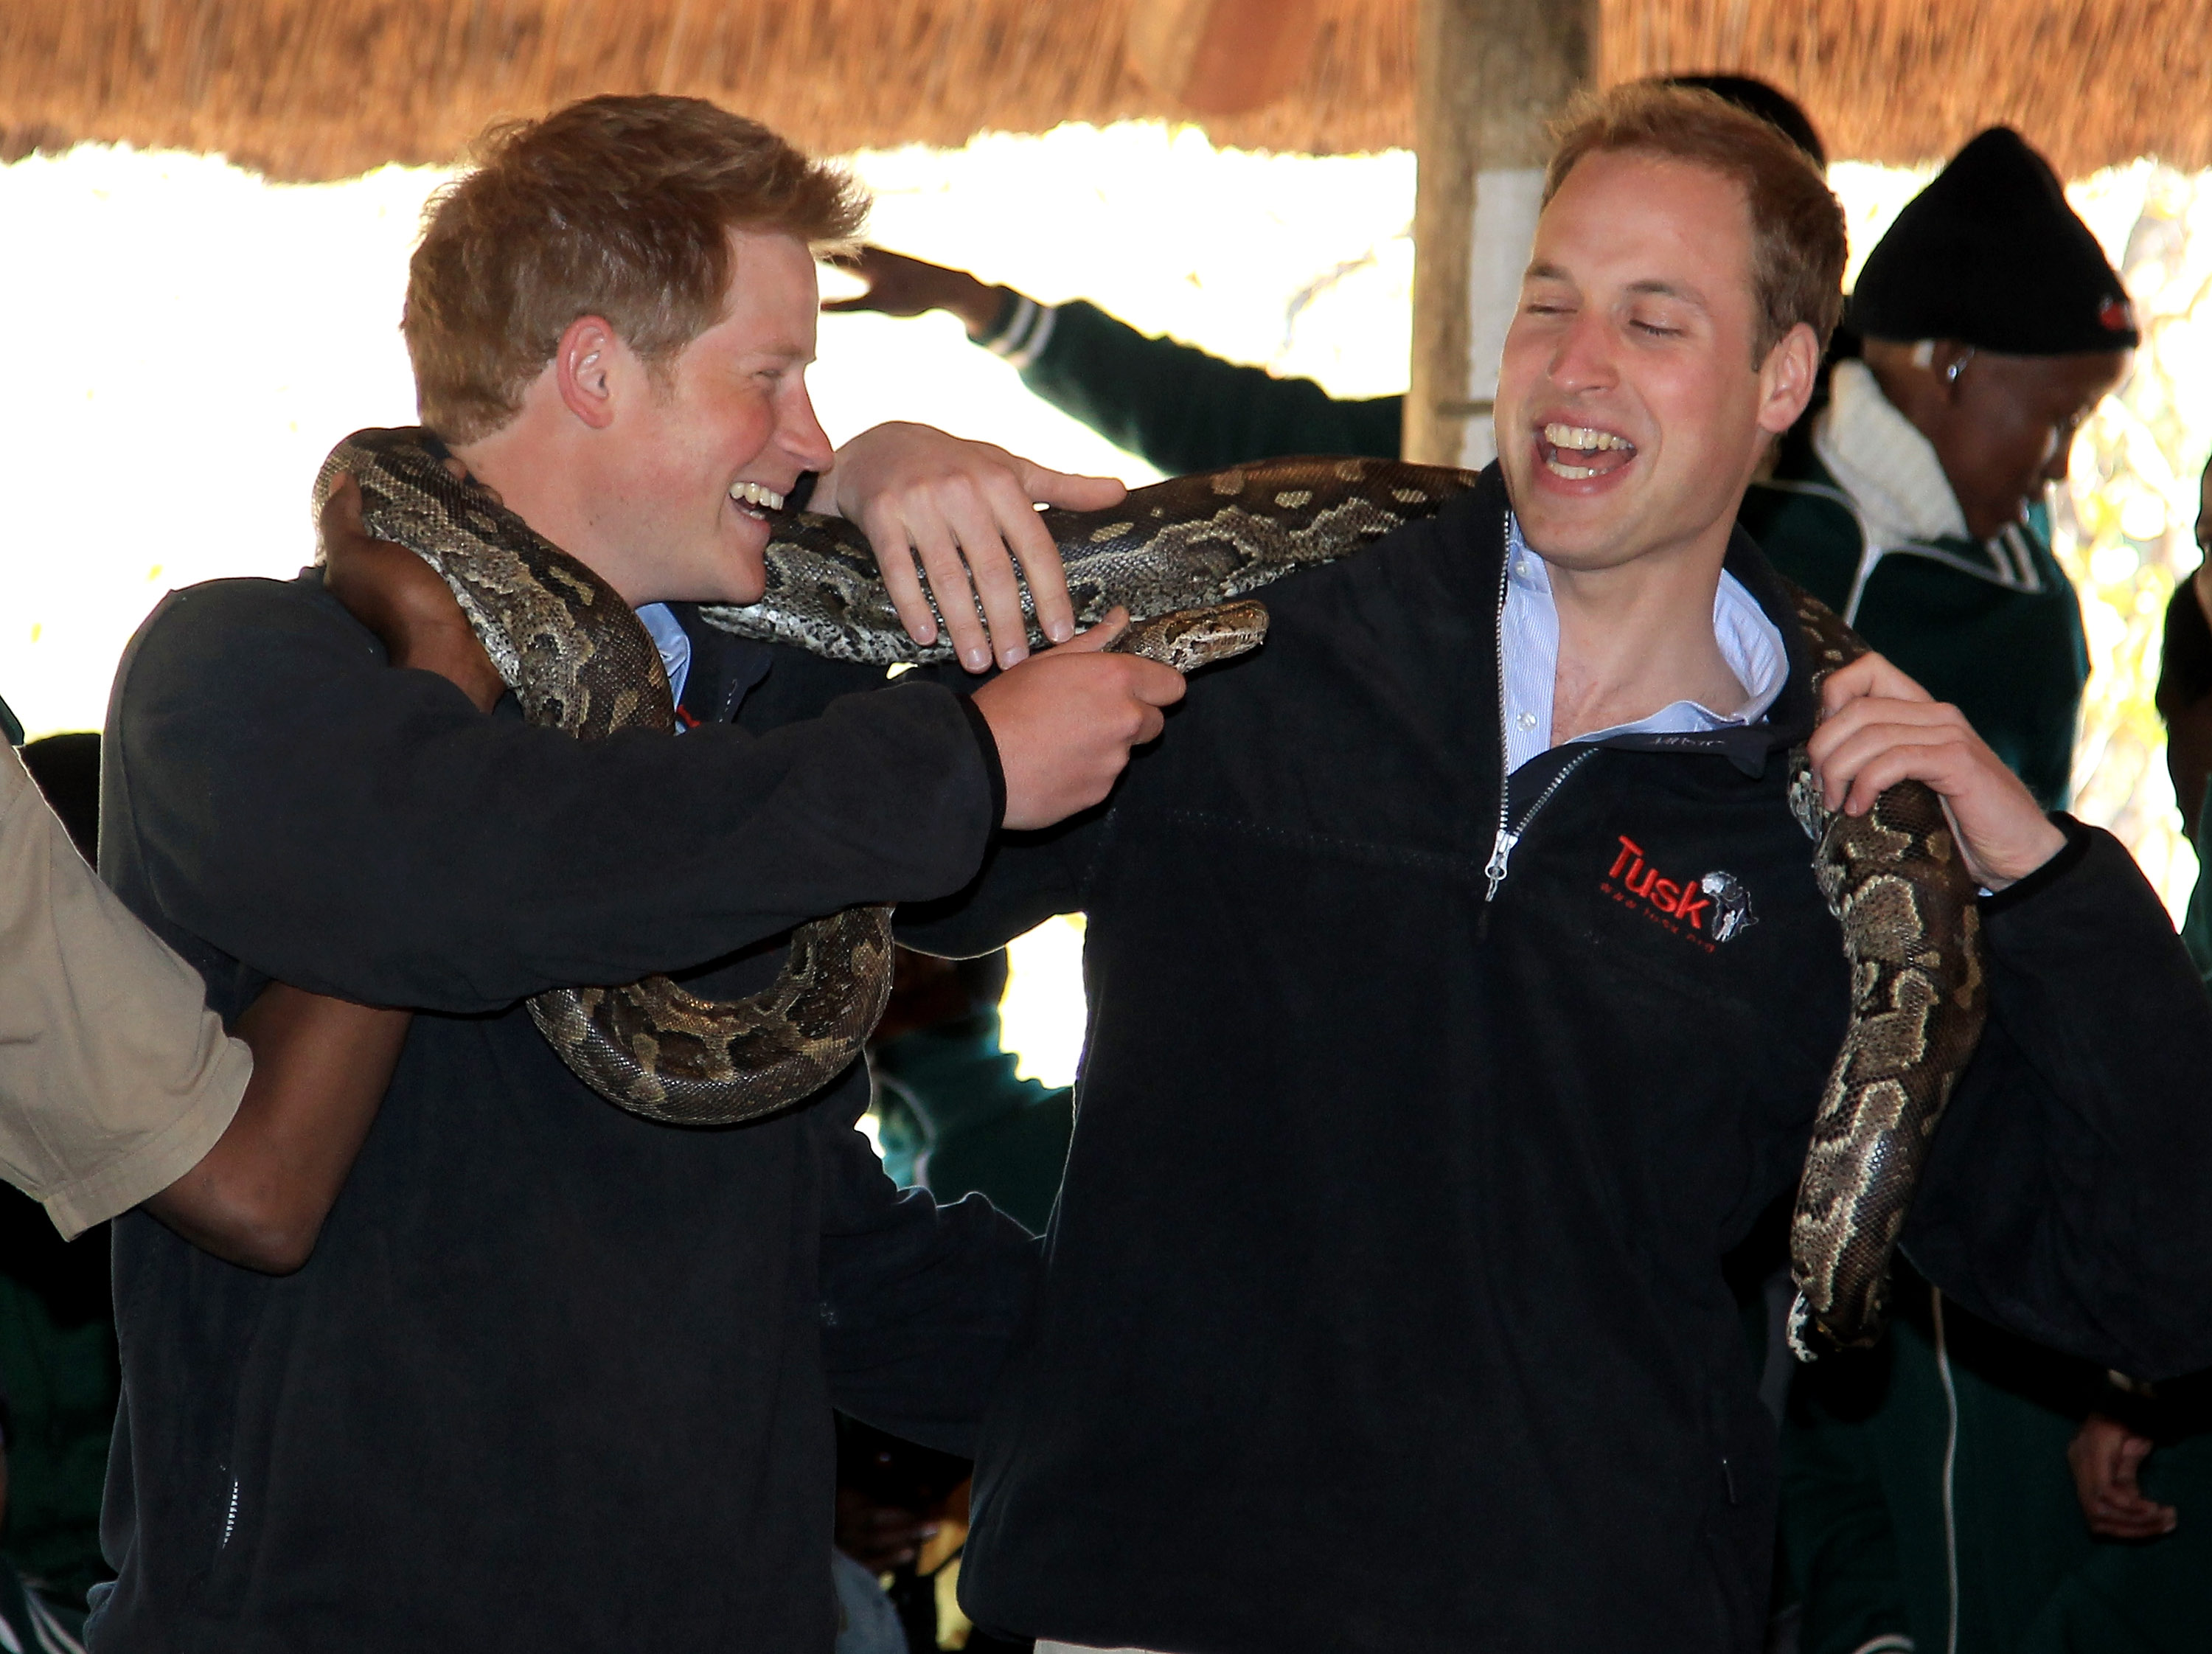 Prince Harry and Prince William (R) hold an African rock python during a visit to Mokolodi Education Centre on June 15, 2010 in Gaborone, Botswana. (Chris Jackson—Getty Images)